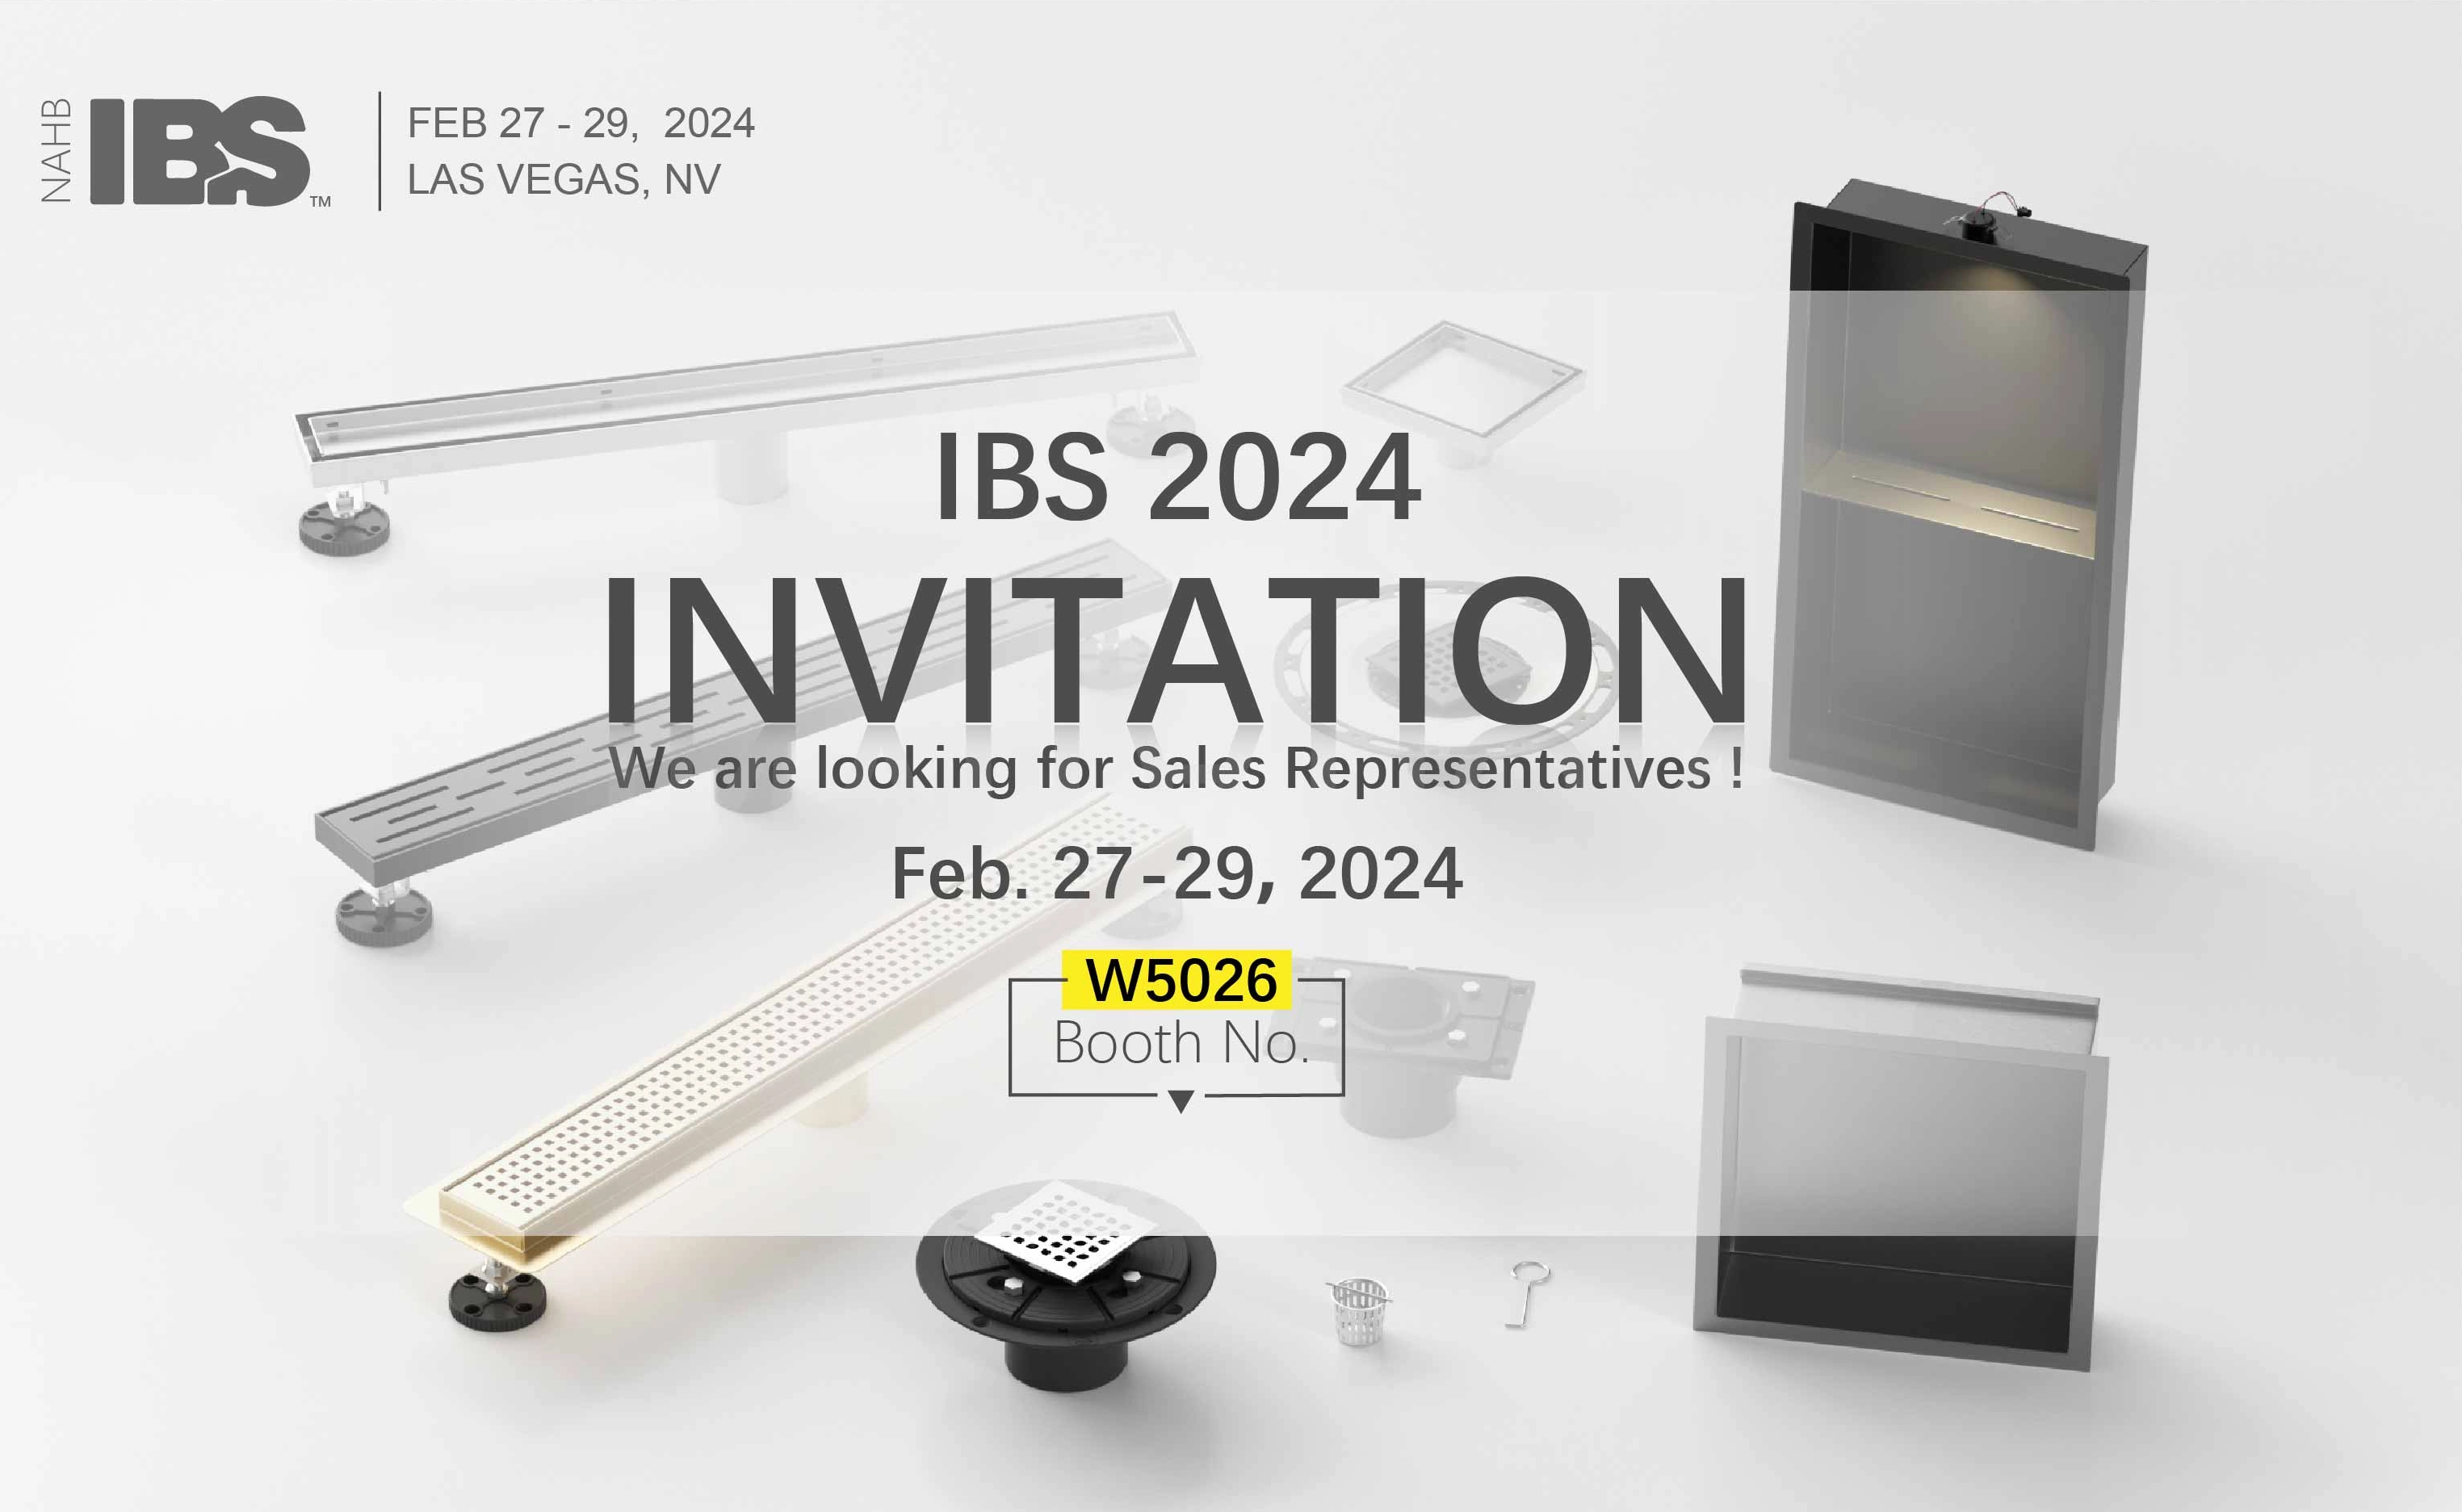 Neodrain presents innovative products at the IBS Fair.